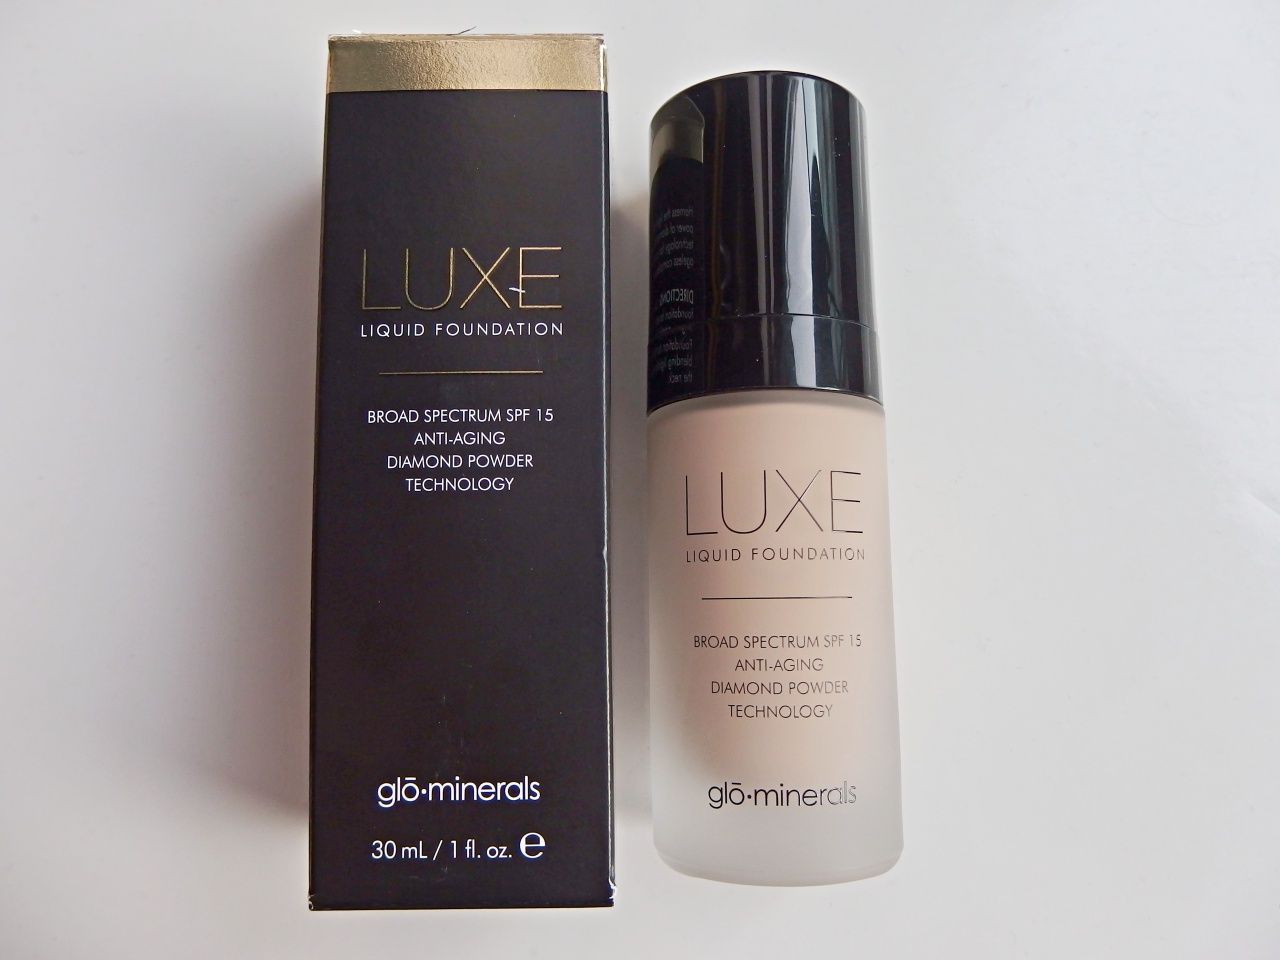 Glominerals Luxe Liquid Foundation Review